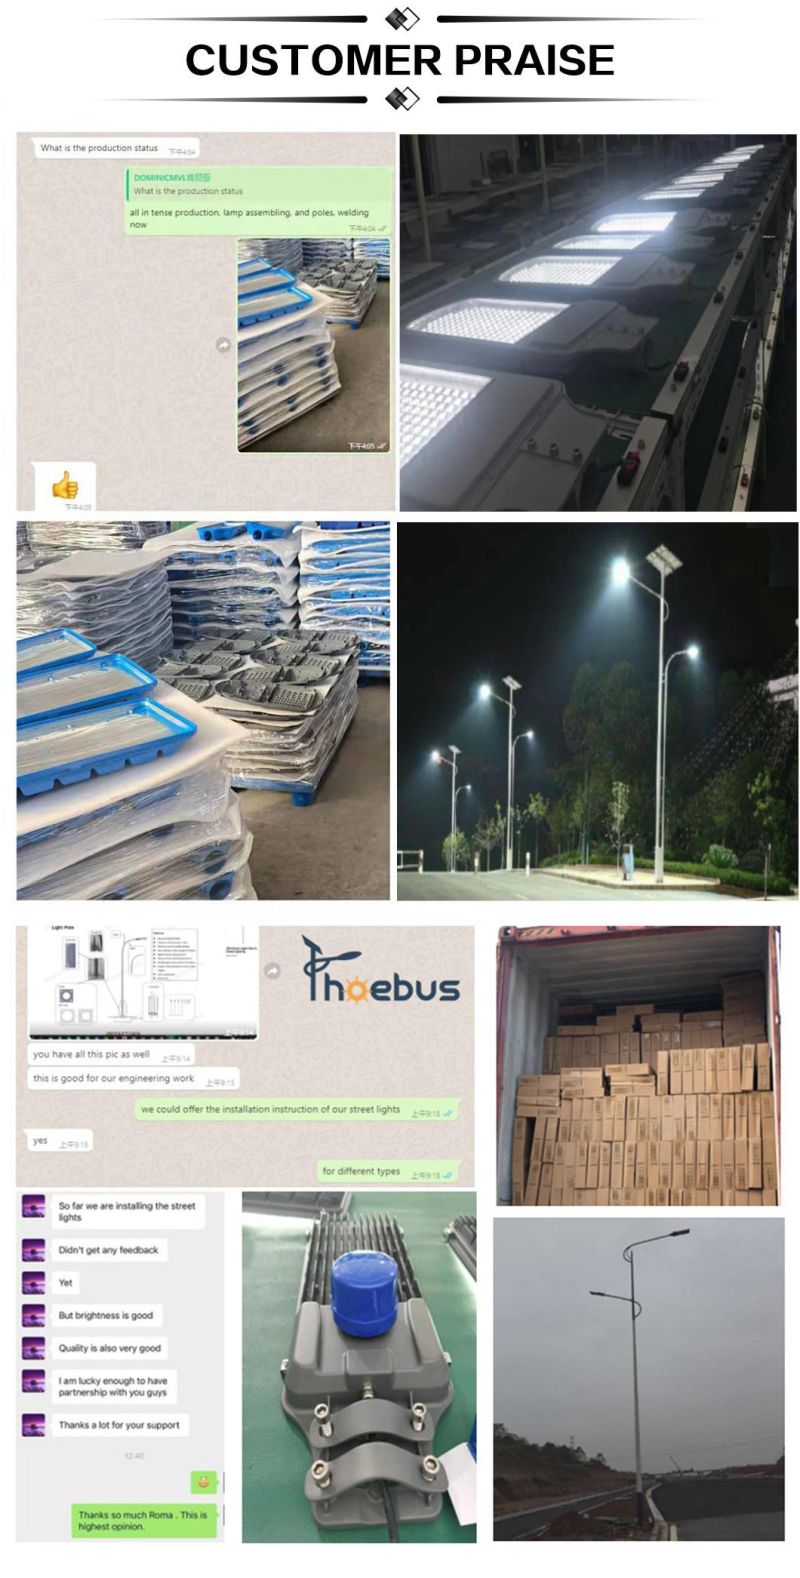 Famous Brand Chip Ultra Bright LED Lamp Outdoor Economic LED Light 300W